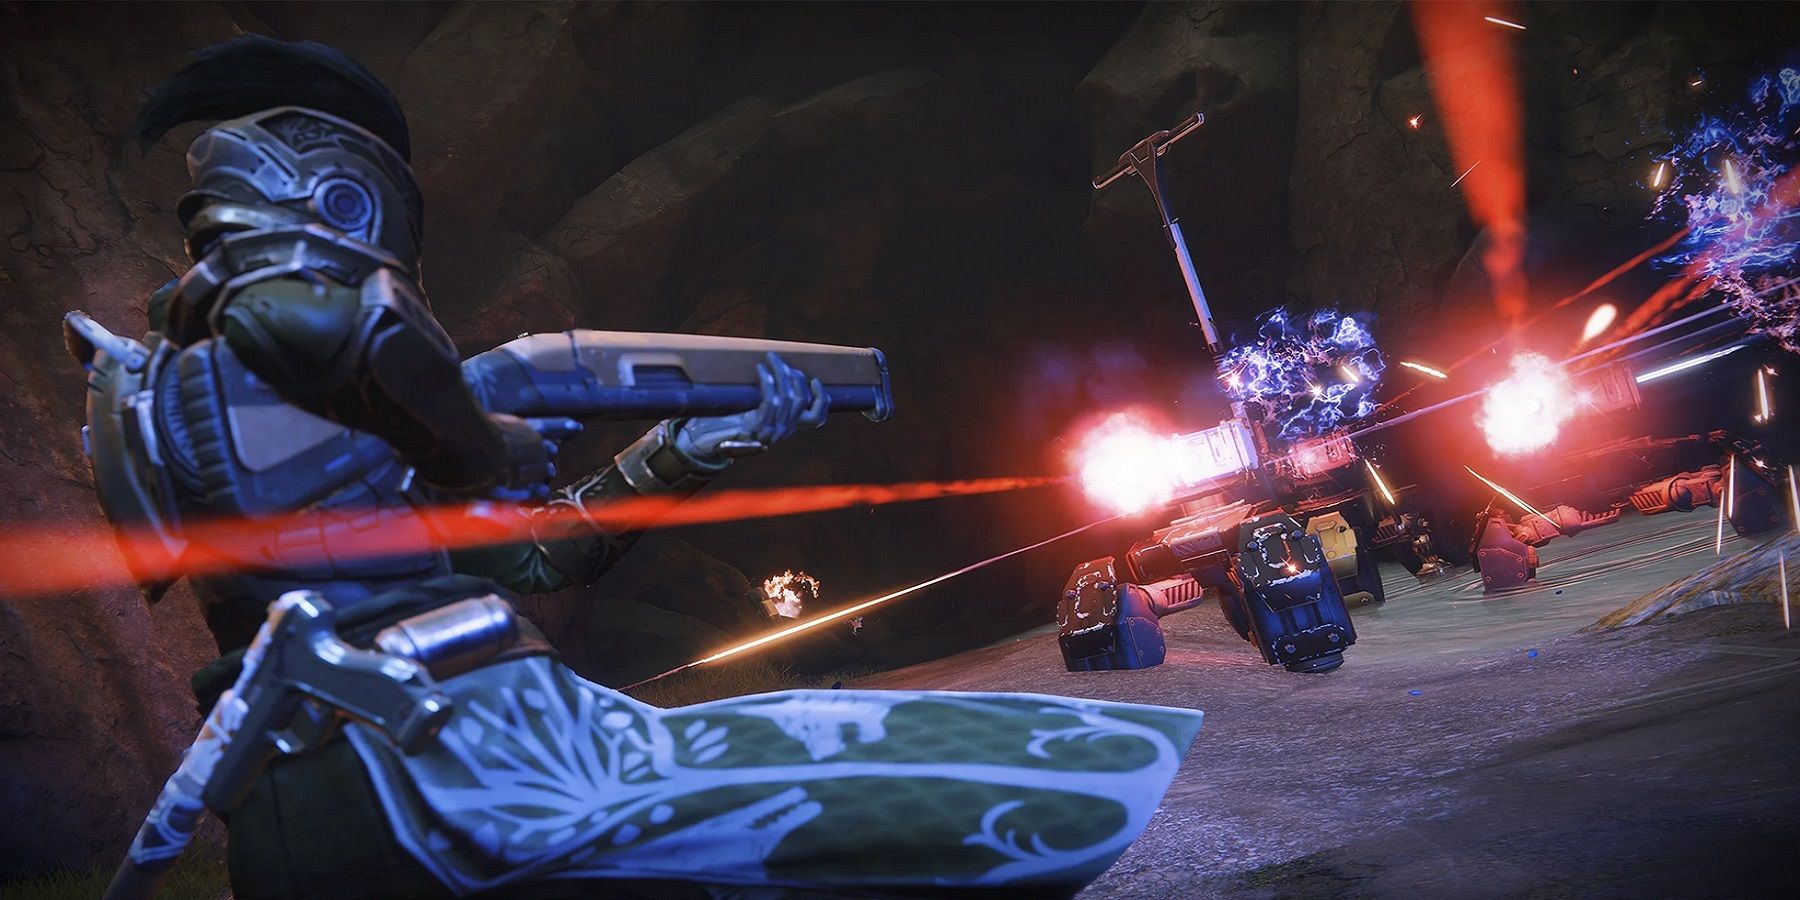 A Destiny 2 player's grinding in Iron Banner led to them getting the worst reload stat possible on a Jorum's Claw pulse rifle.